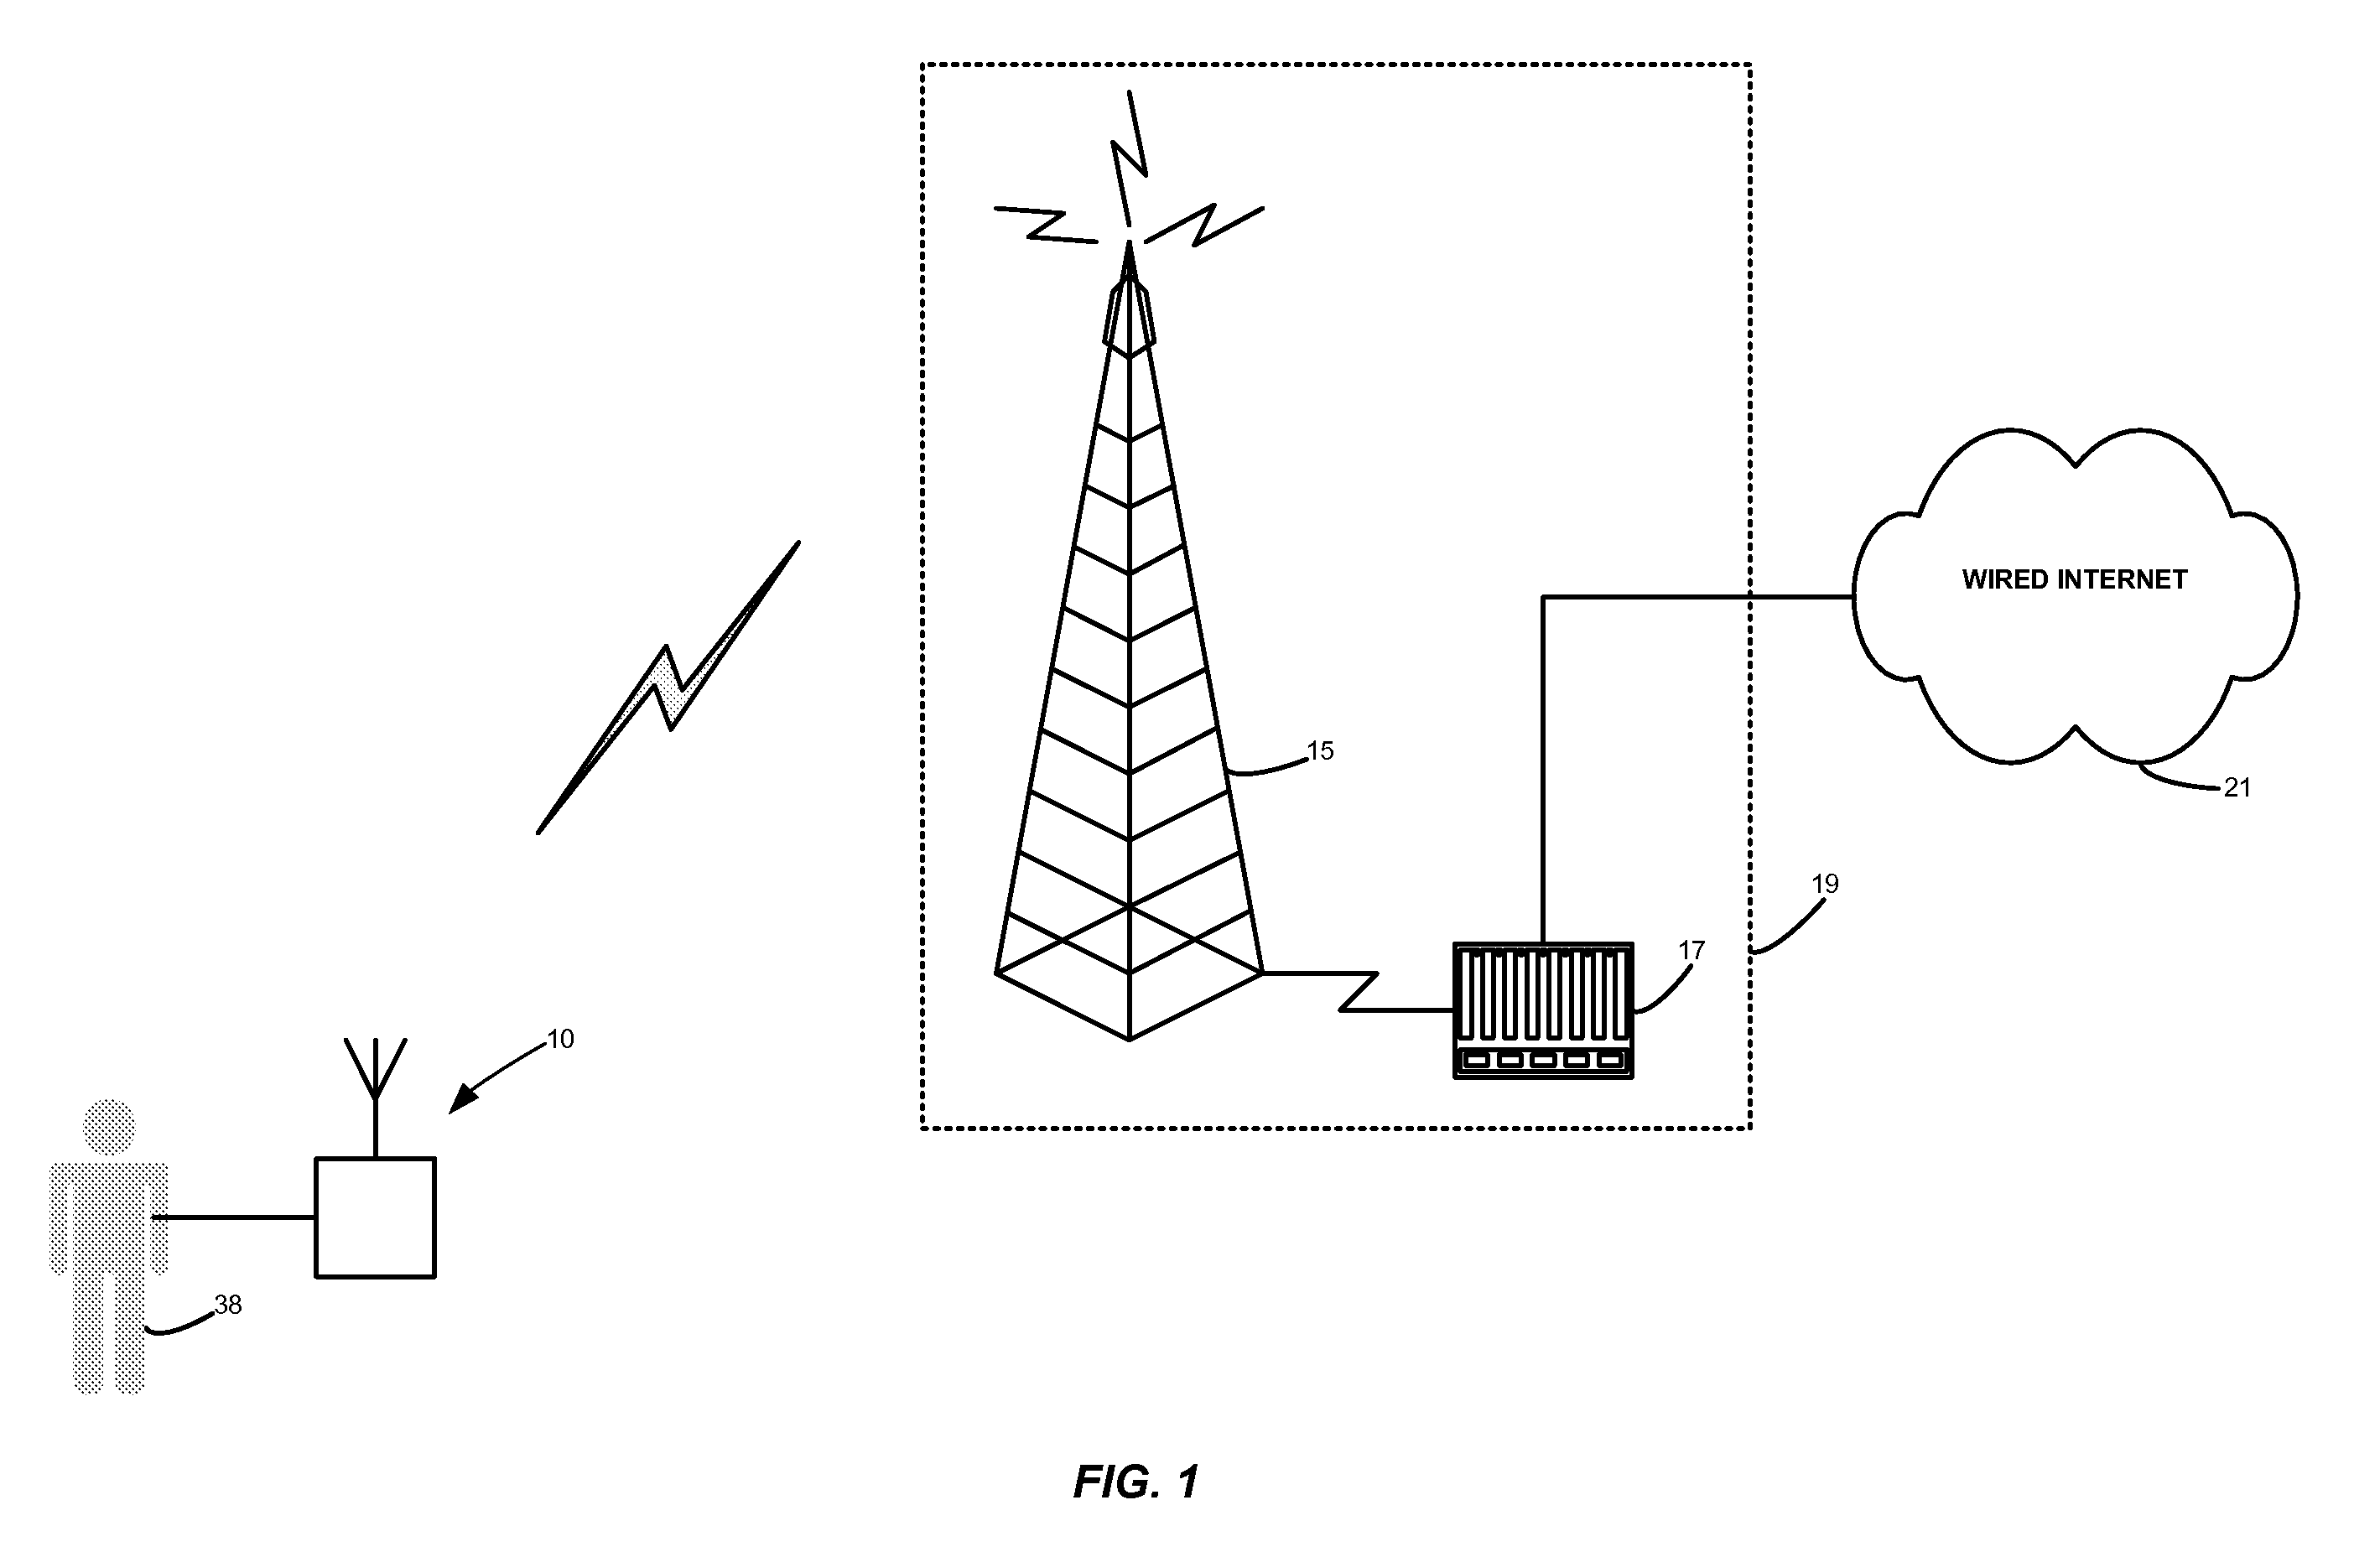 Method and apparatus for exercise monitoring combining exercise monitoring and visual data with wireless internet connectivity